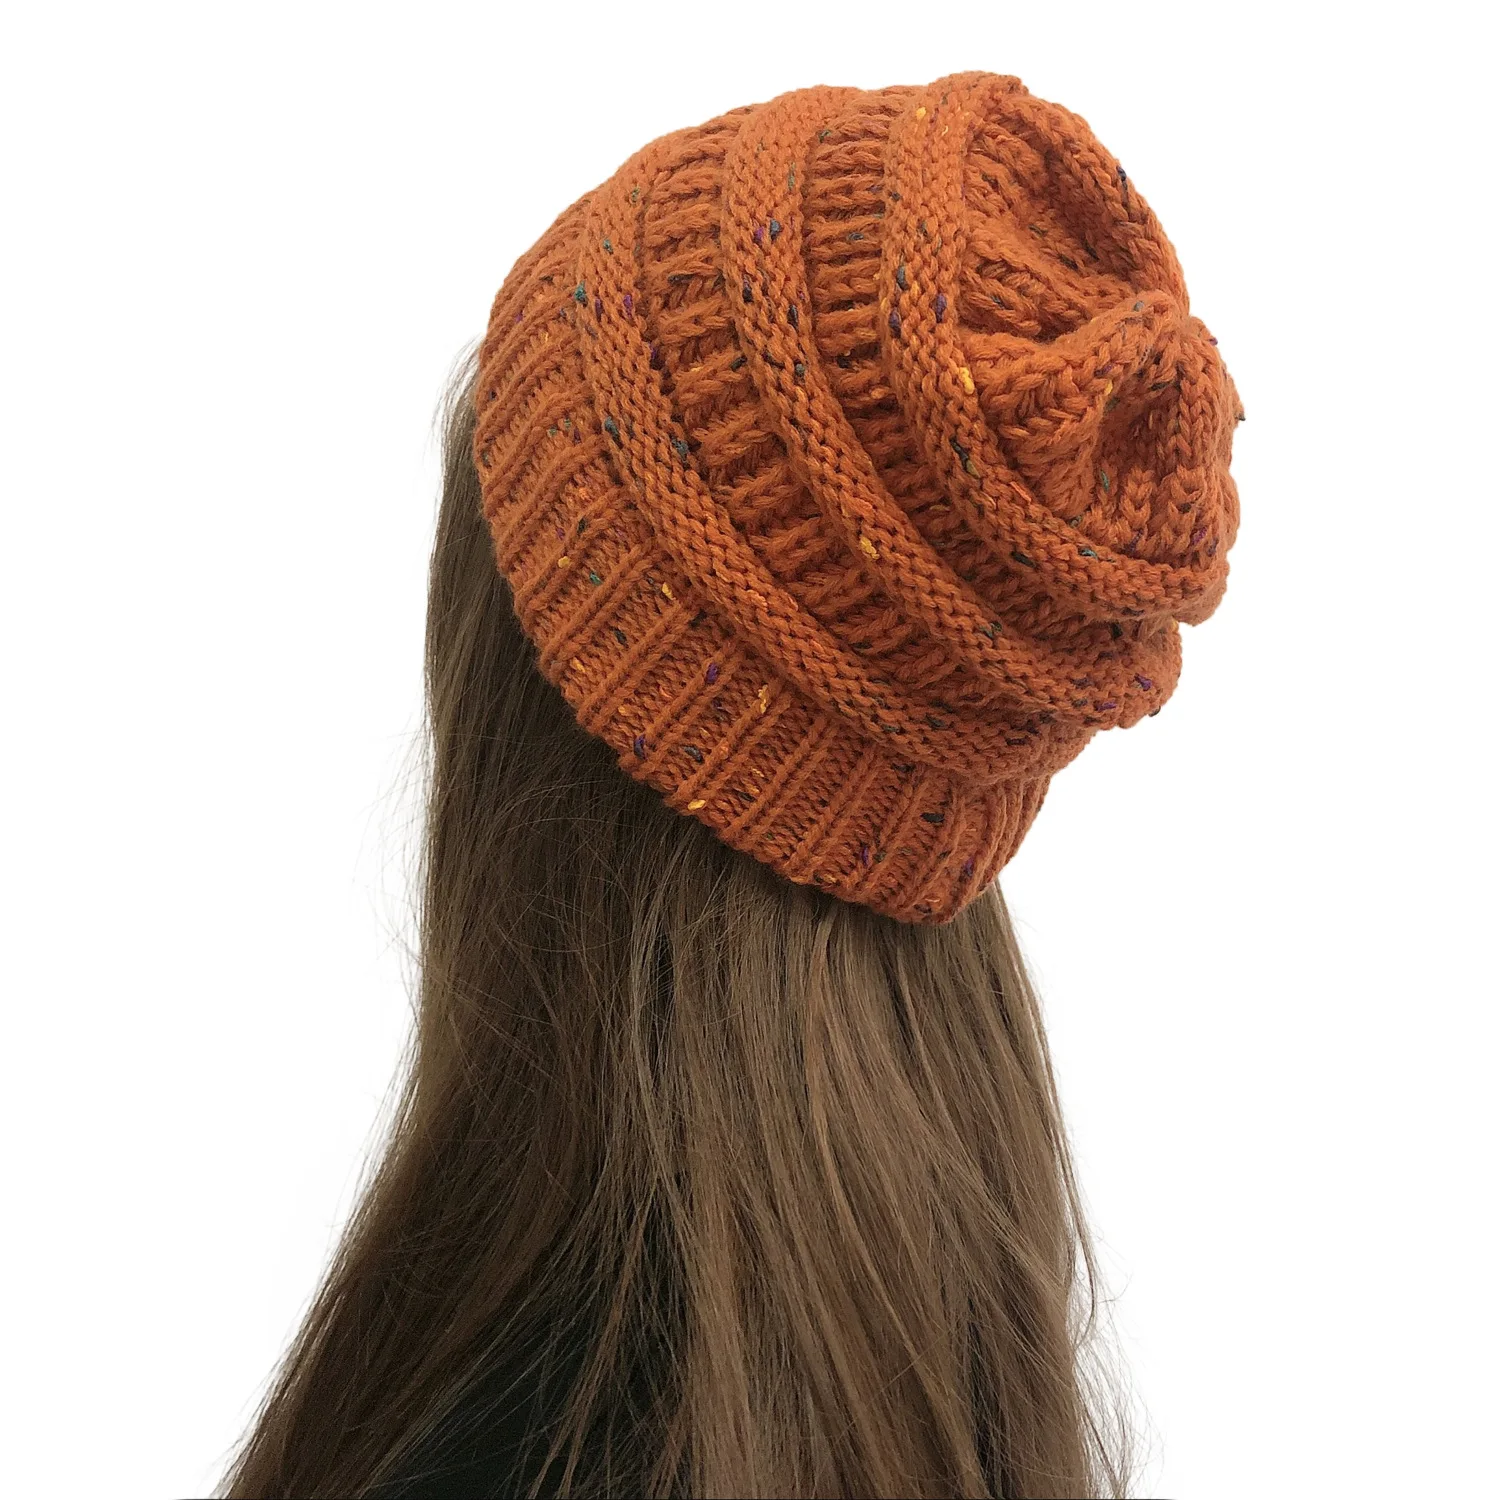 Bubble Knit Multi Chunky Thick Cable Knit Beanie Slouch Skull Winter Hat S13 